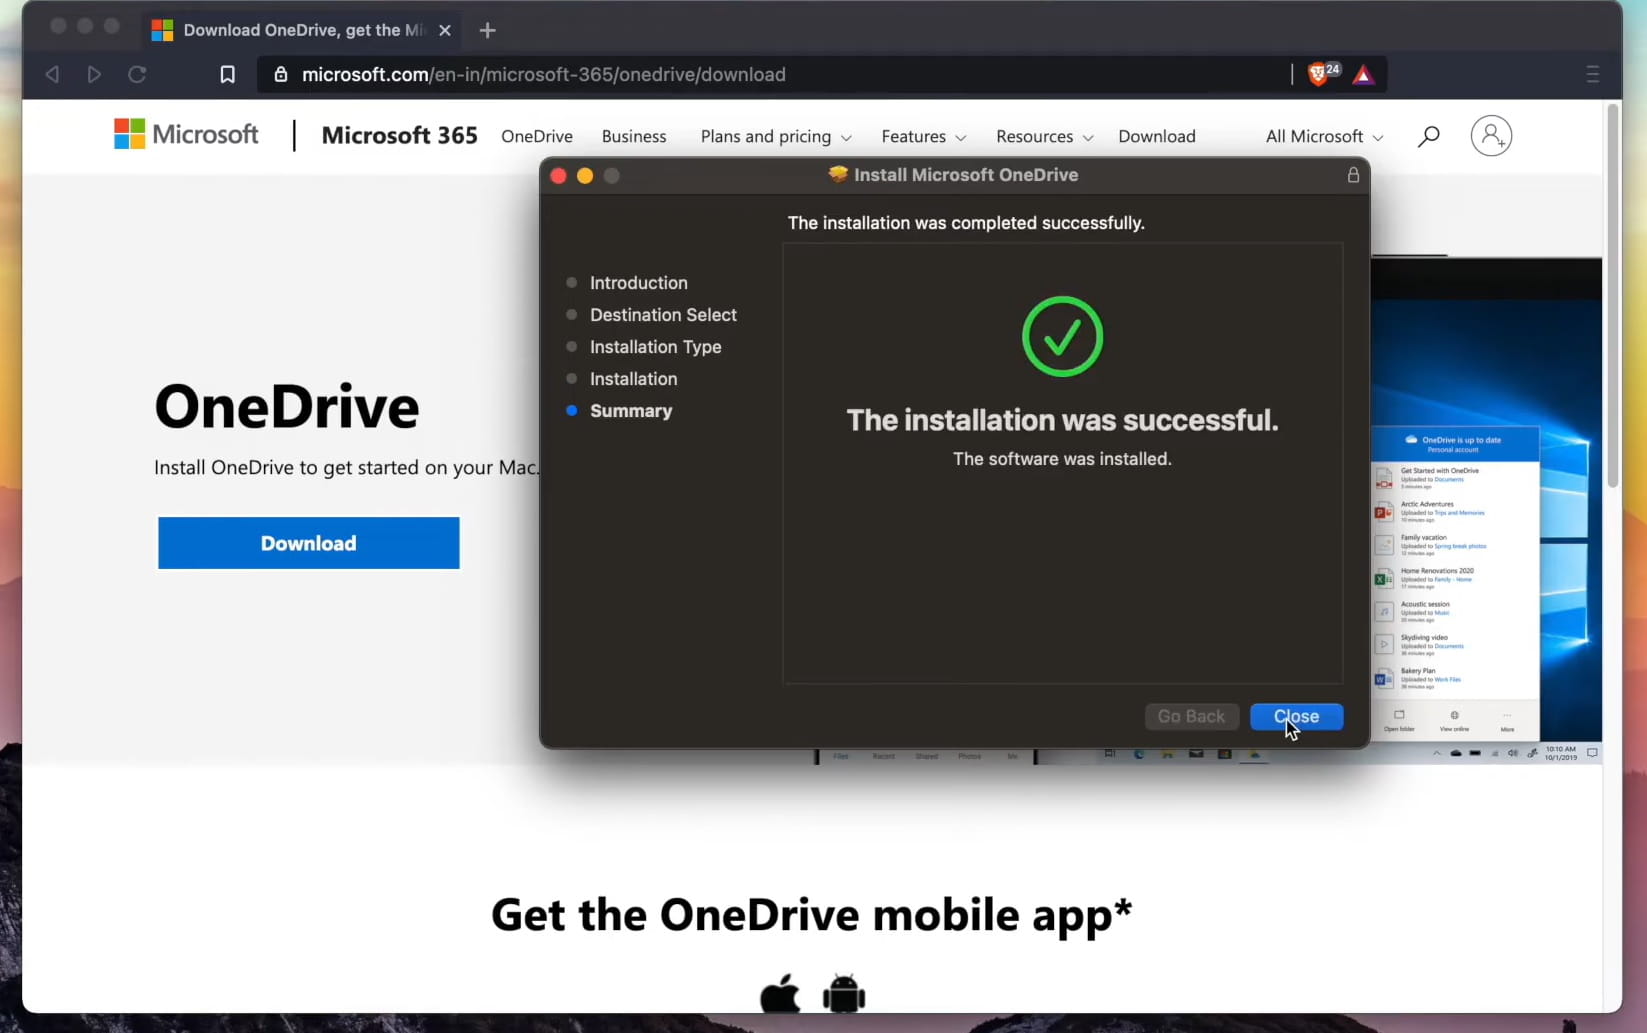 You can install OdinDrive directly in the Apple store.